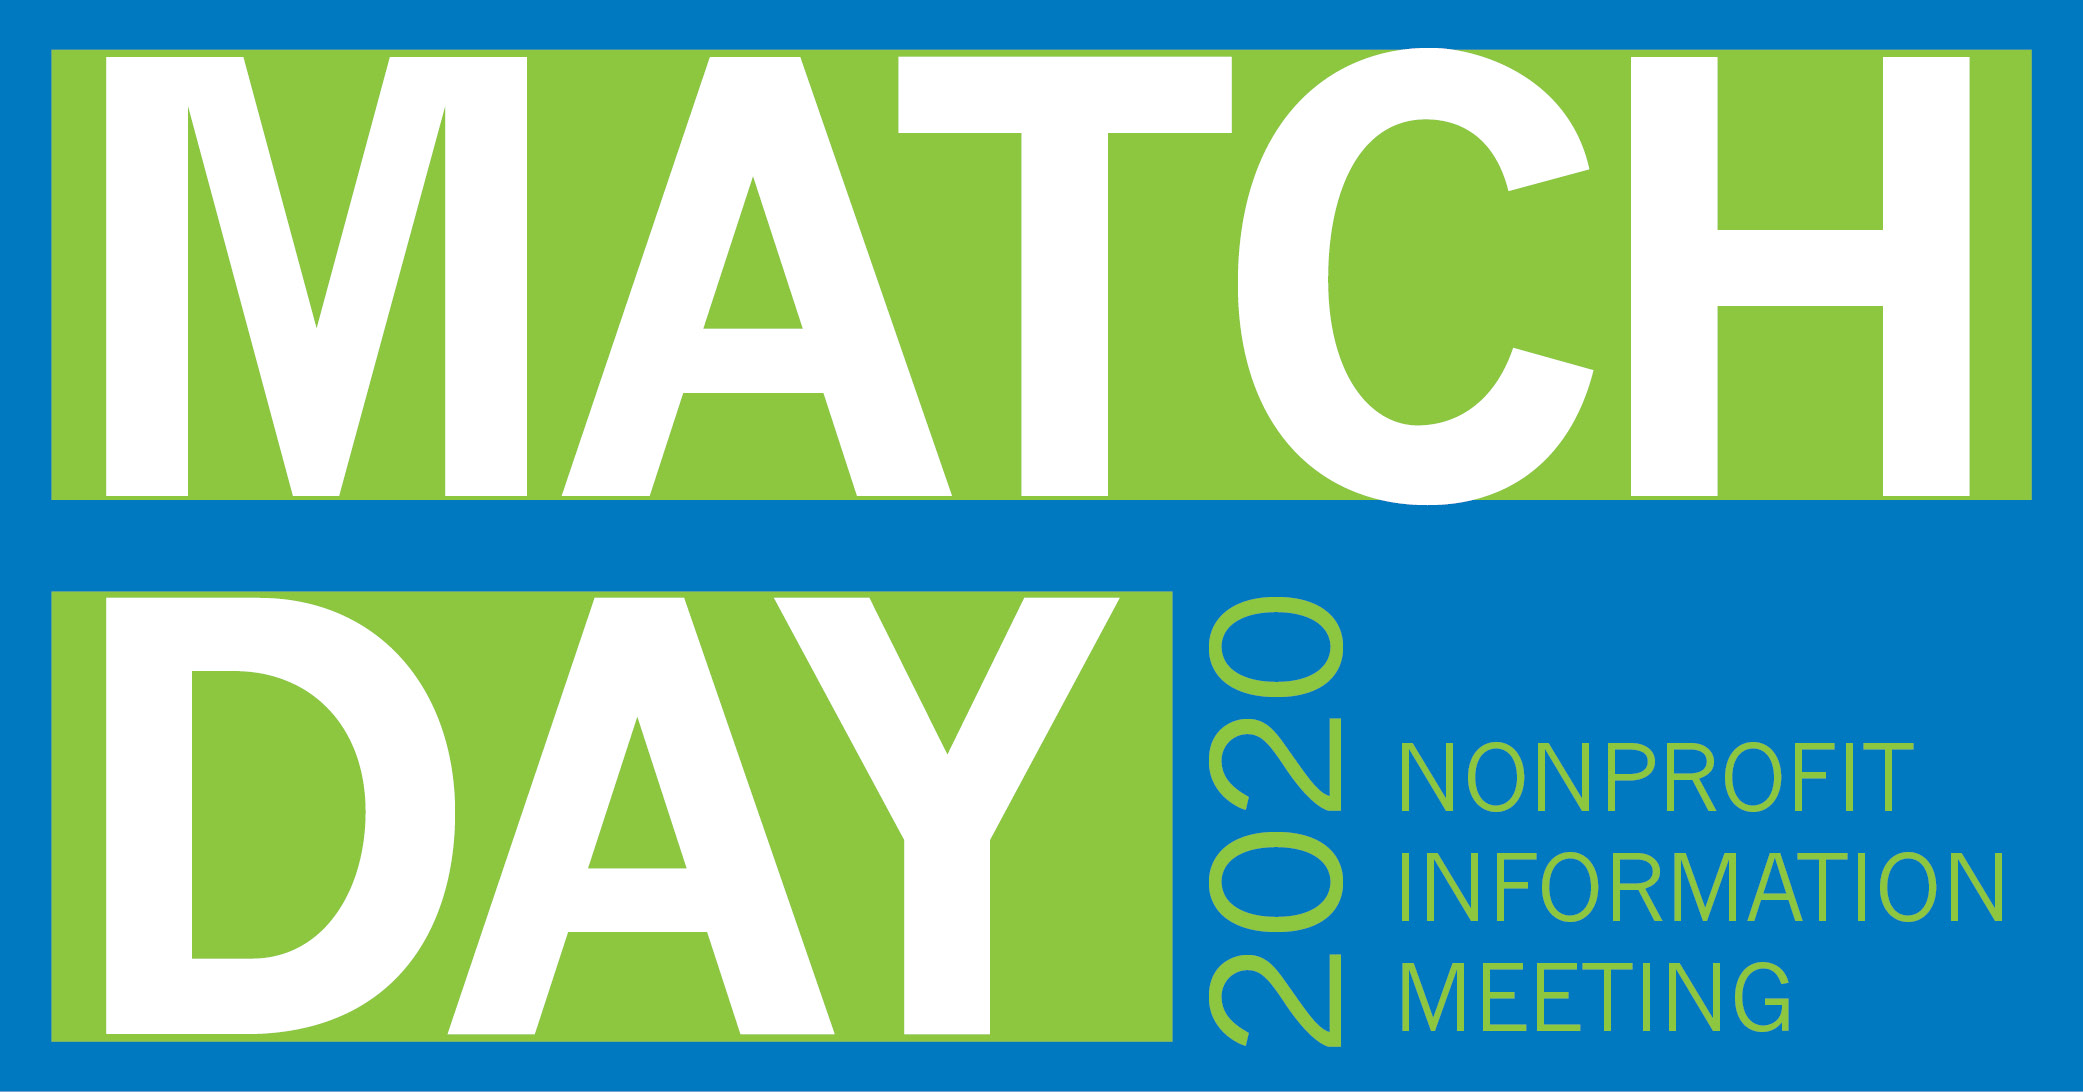 Event Promo Photo For Match Day 2020 Nonprofit Information Meeting